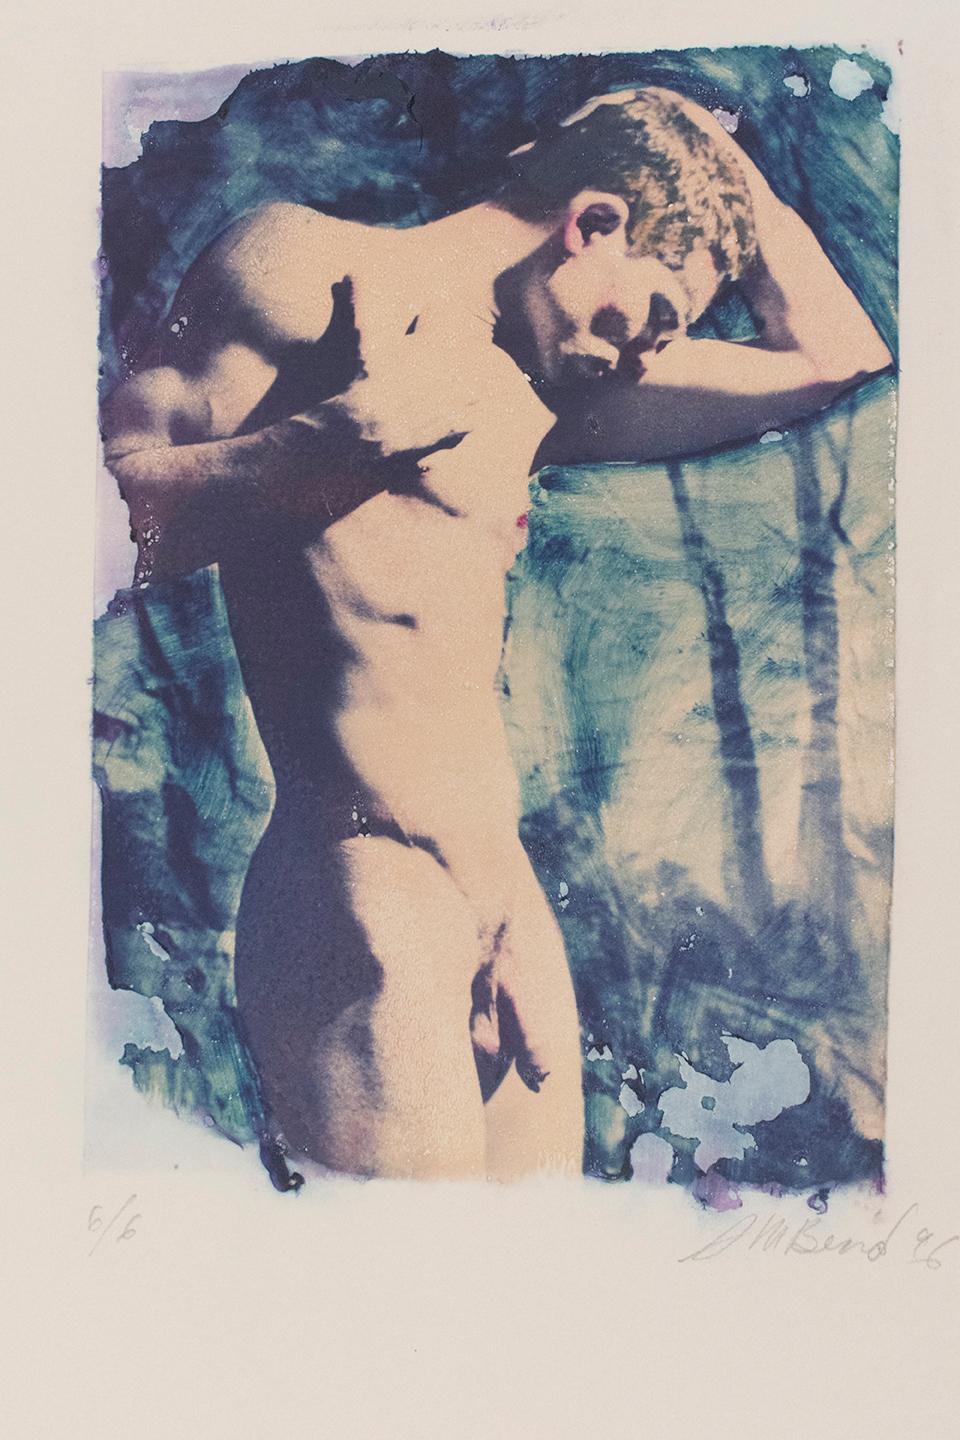 Mark Beard Nude Photograph - Untitled 10 (Polaroid Transfer of Young Male Nude on Rives BFK)